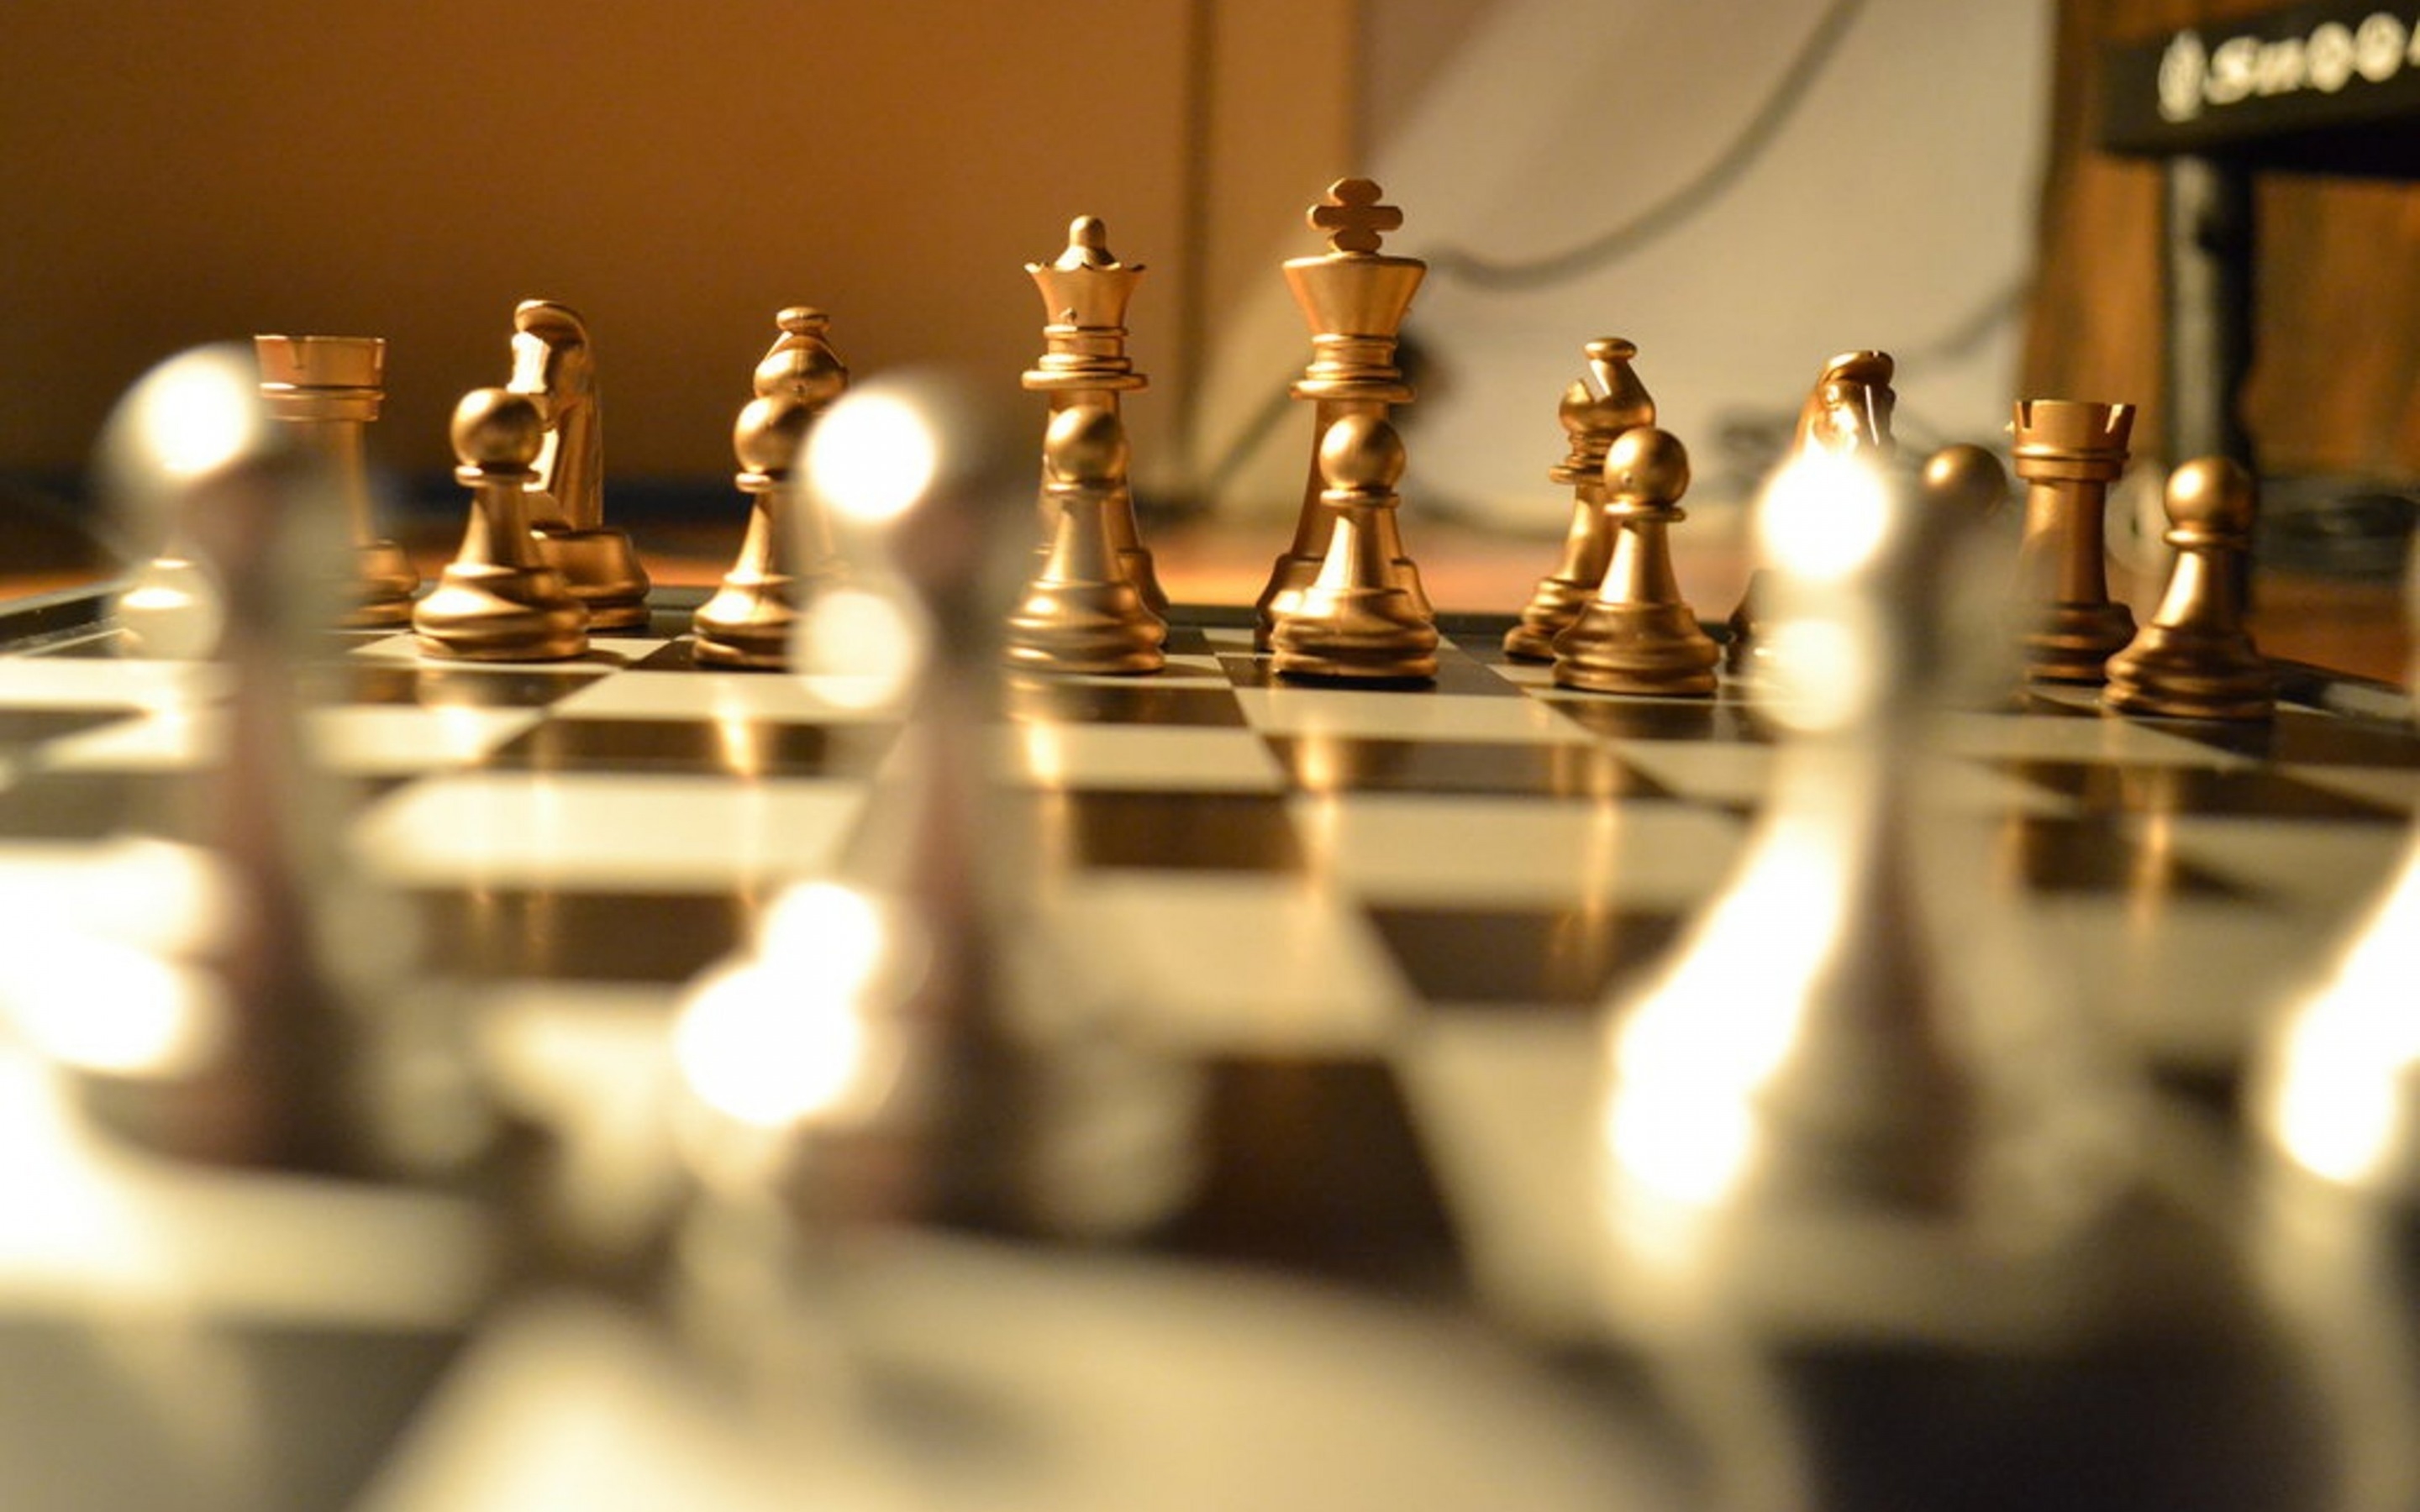 Chess tablet, laptop wallpapers hd, desktop backgrounds 1366x768, images  and pictures